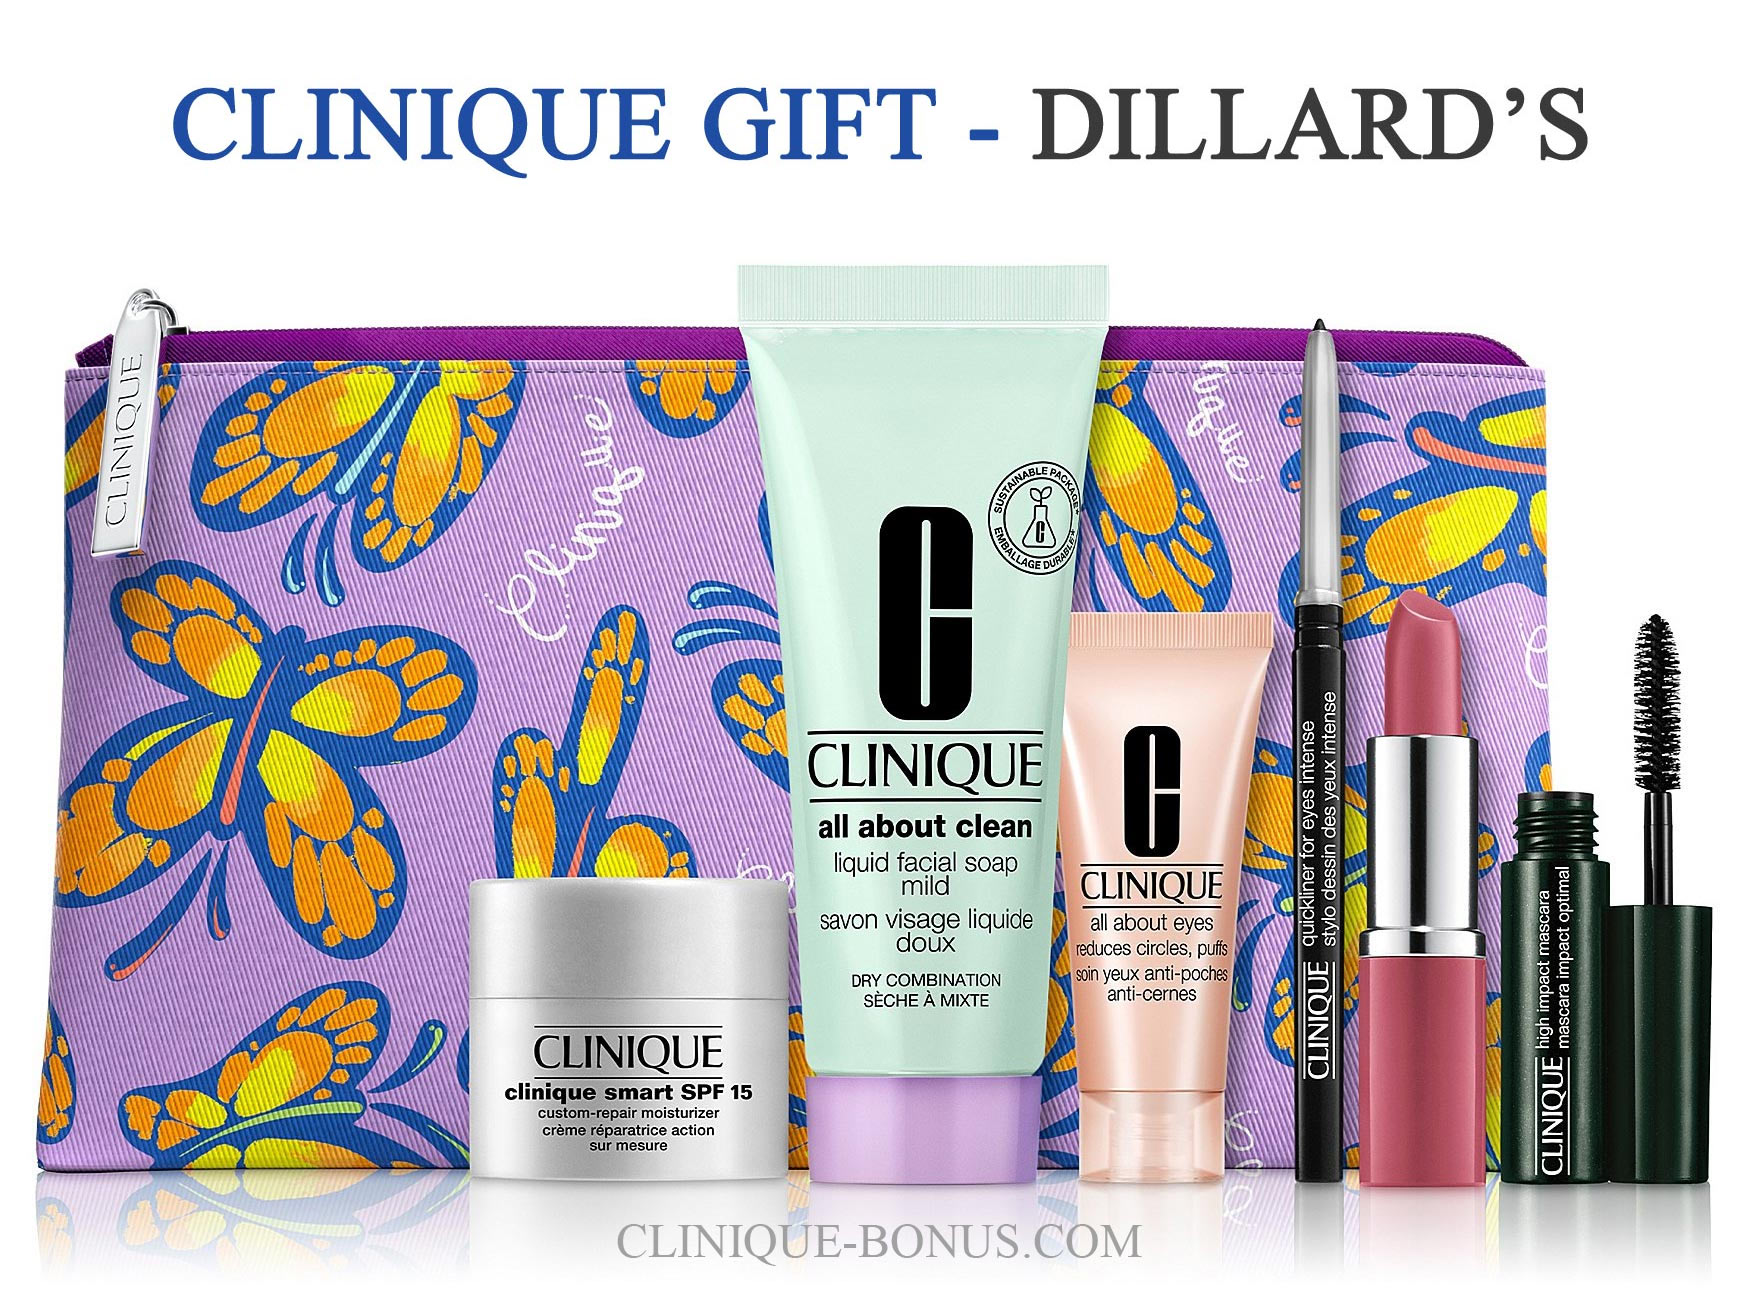 Clinique's Best & Brightest: Skincare and Makeup Set 2021 NEW | eBay